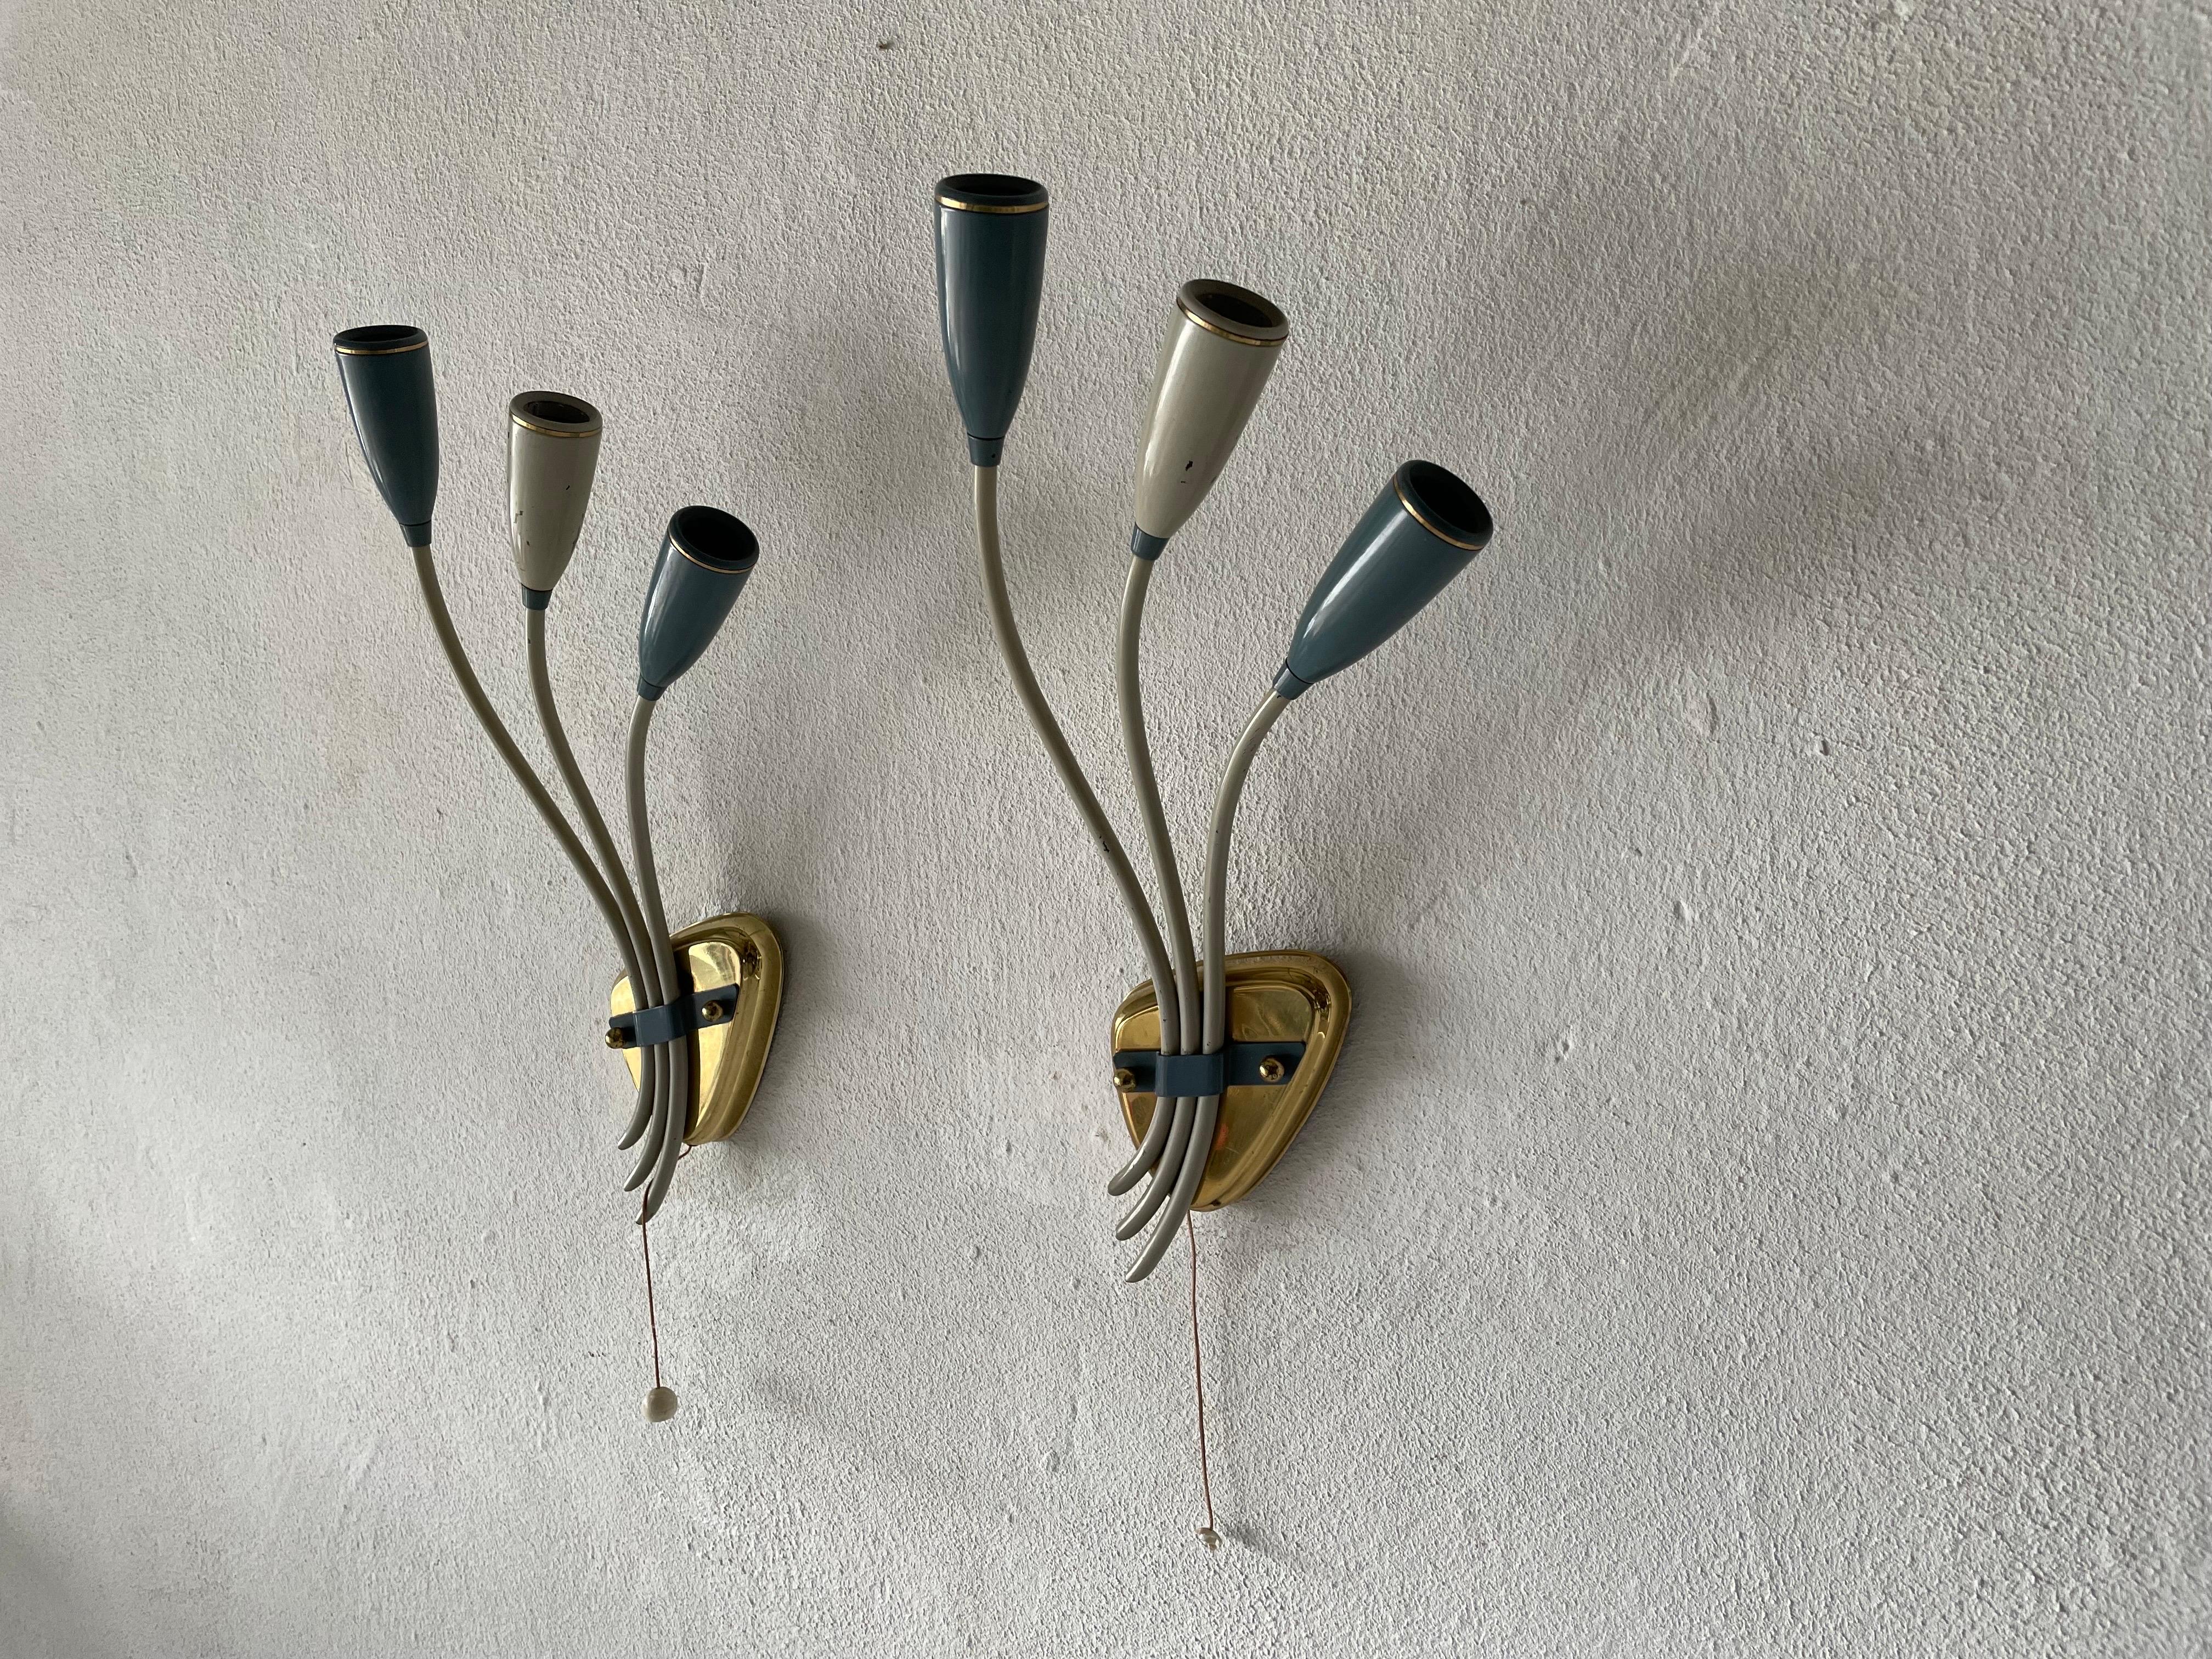 3-head Blue and White Metal Pair of Sputnik Sconces, 1950s, Germany

Very elegant and Minimalist wall lamps
Lamp is in very good condition.

These lamps works with 3x E14 standard light bulbs. 
Wired and suitable to use in all countries. (110-220